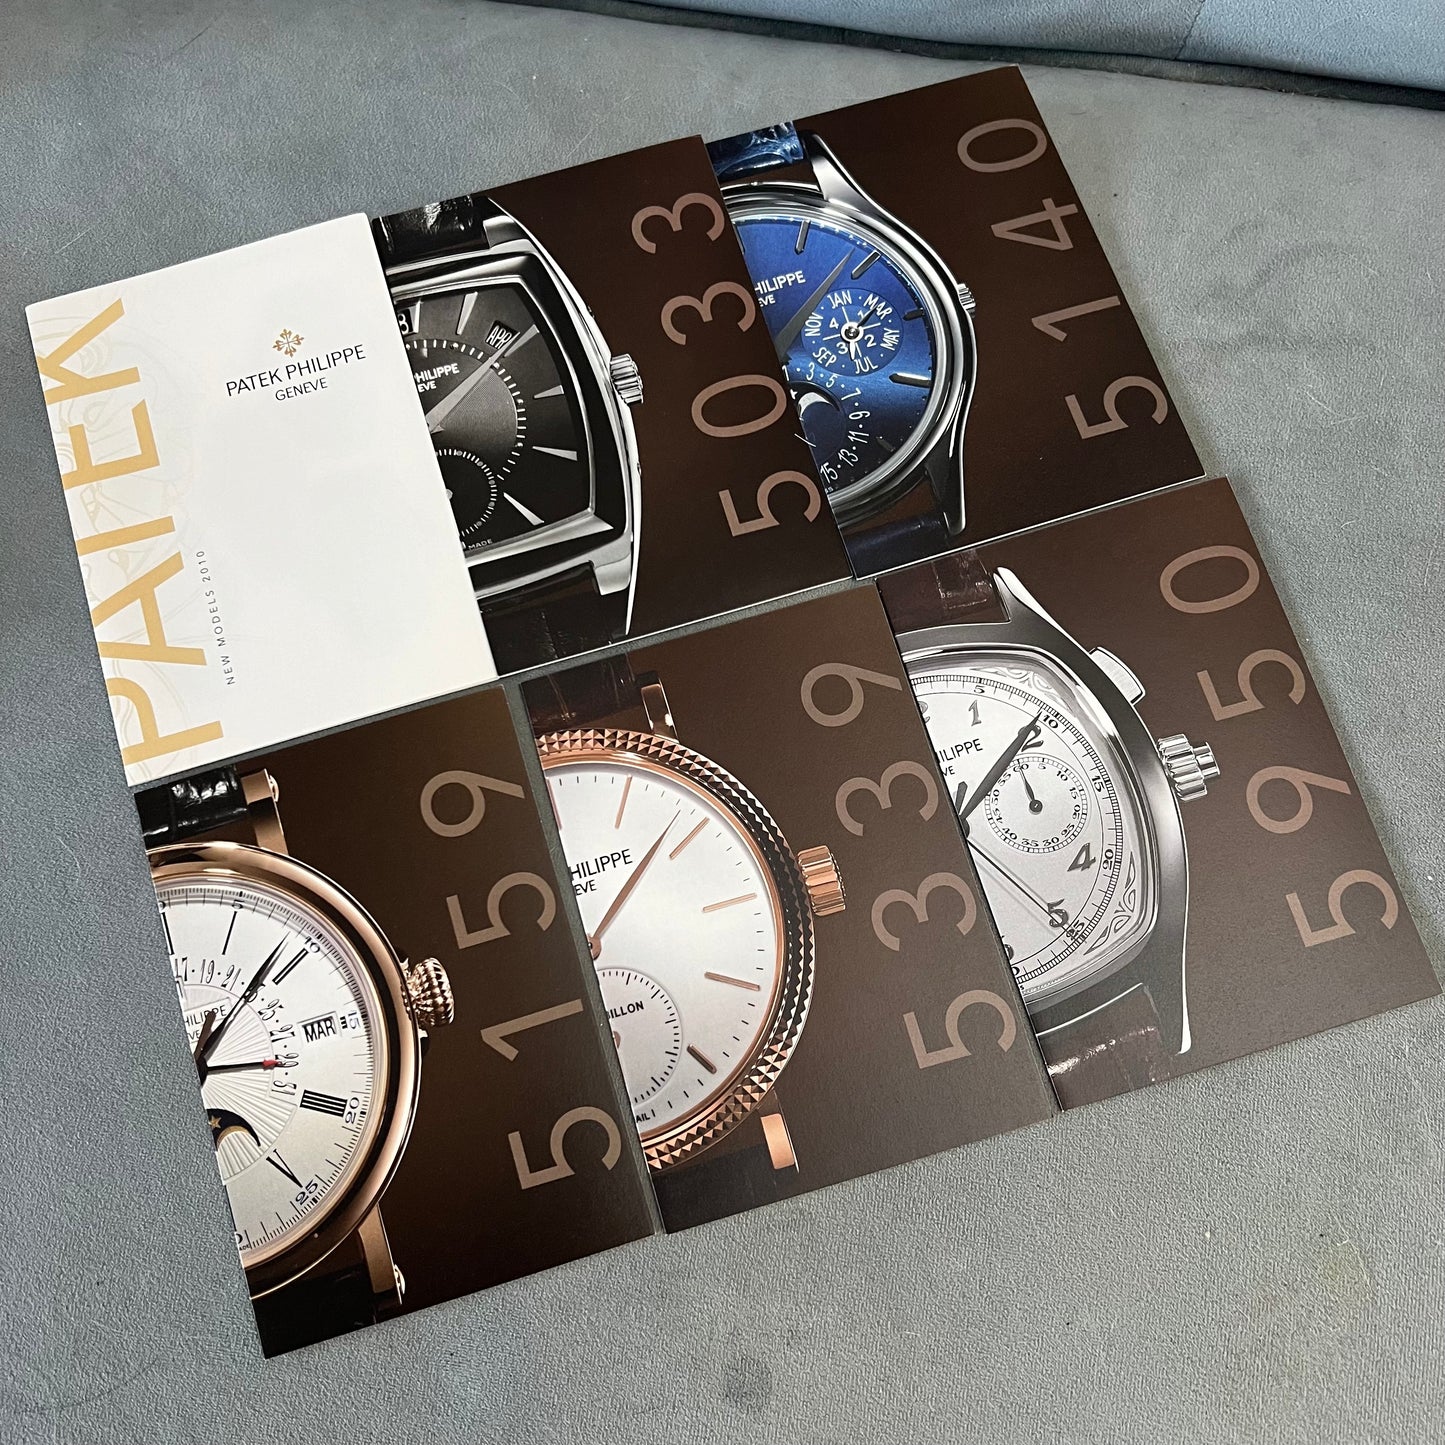 PATEK PHILIPPE New Models 2010 Set of 22 Cards   6.30x4.5x1.5 inches